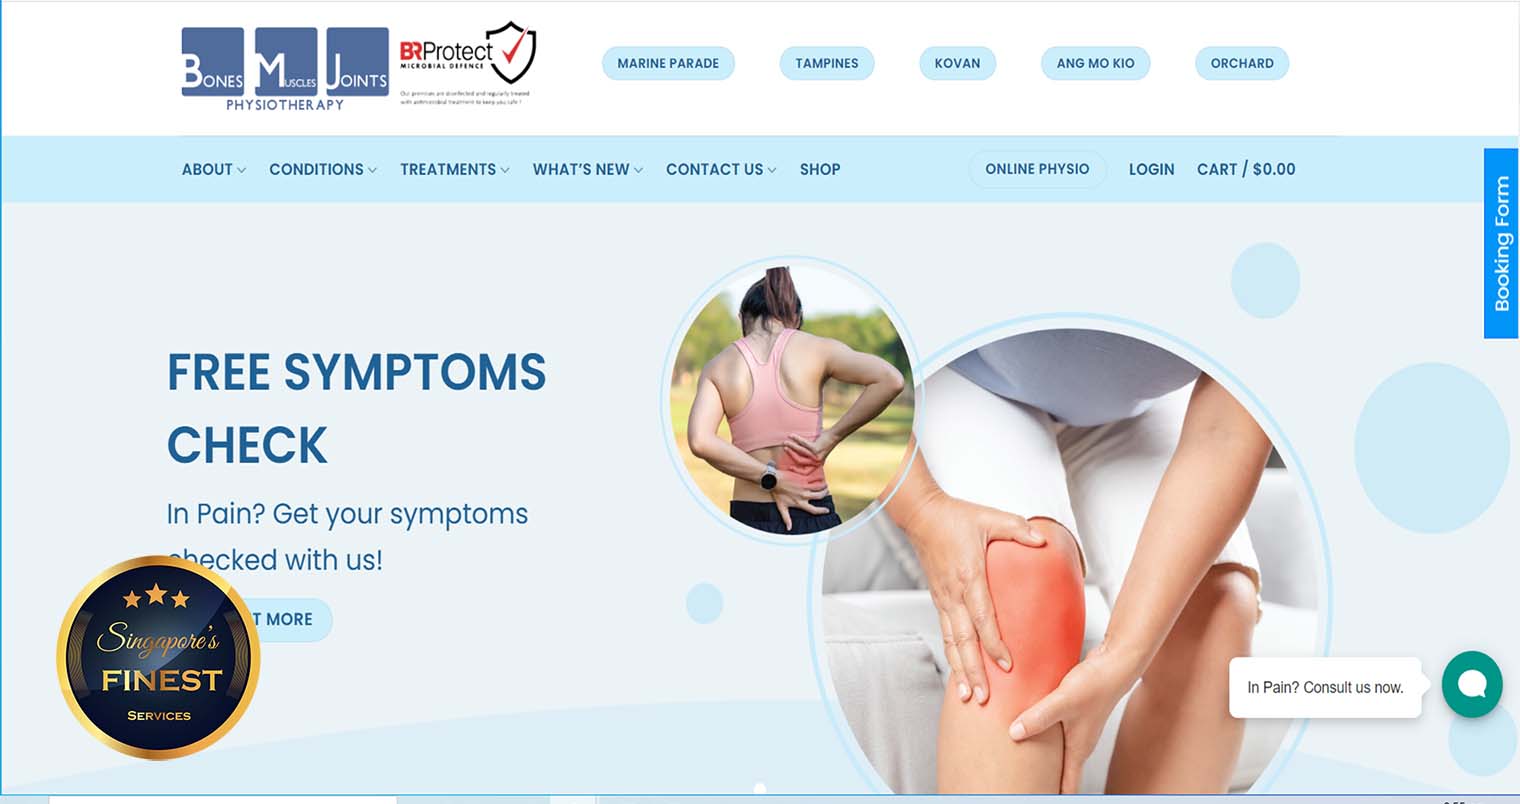 BMJ - Physiotherapy Clinics Singapore